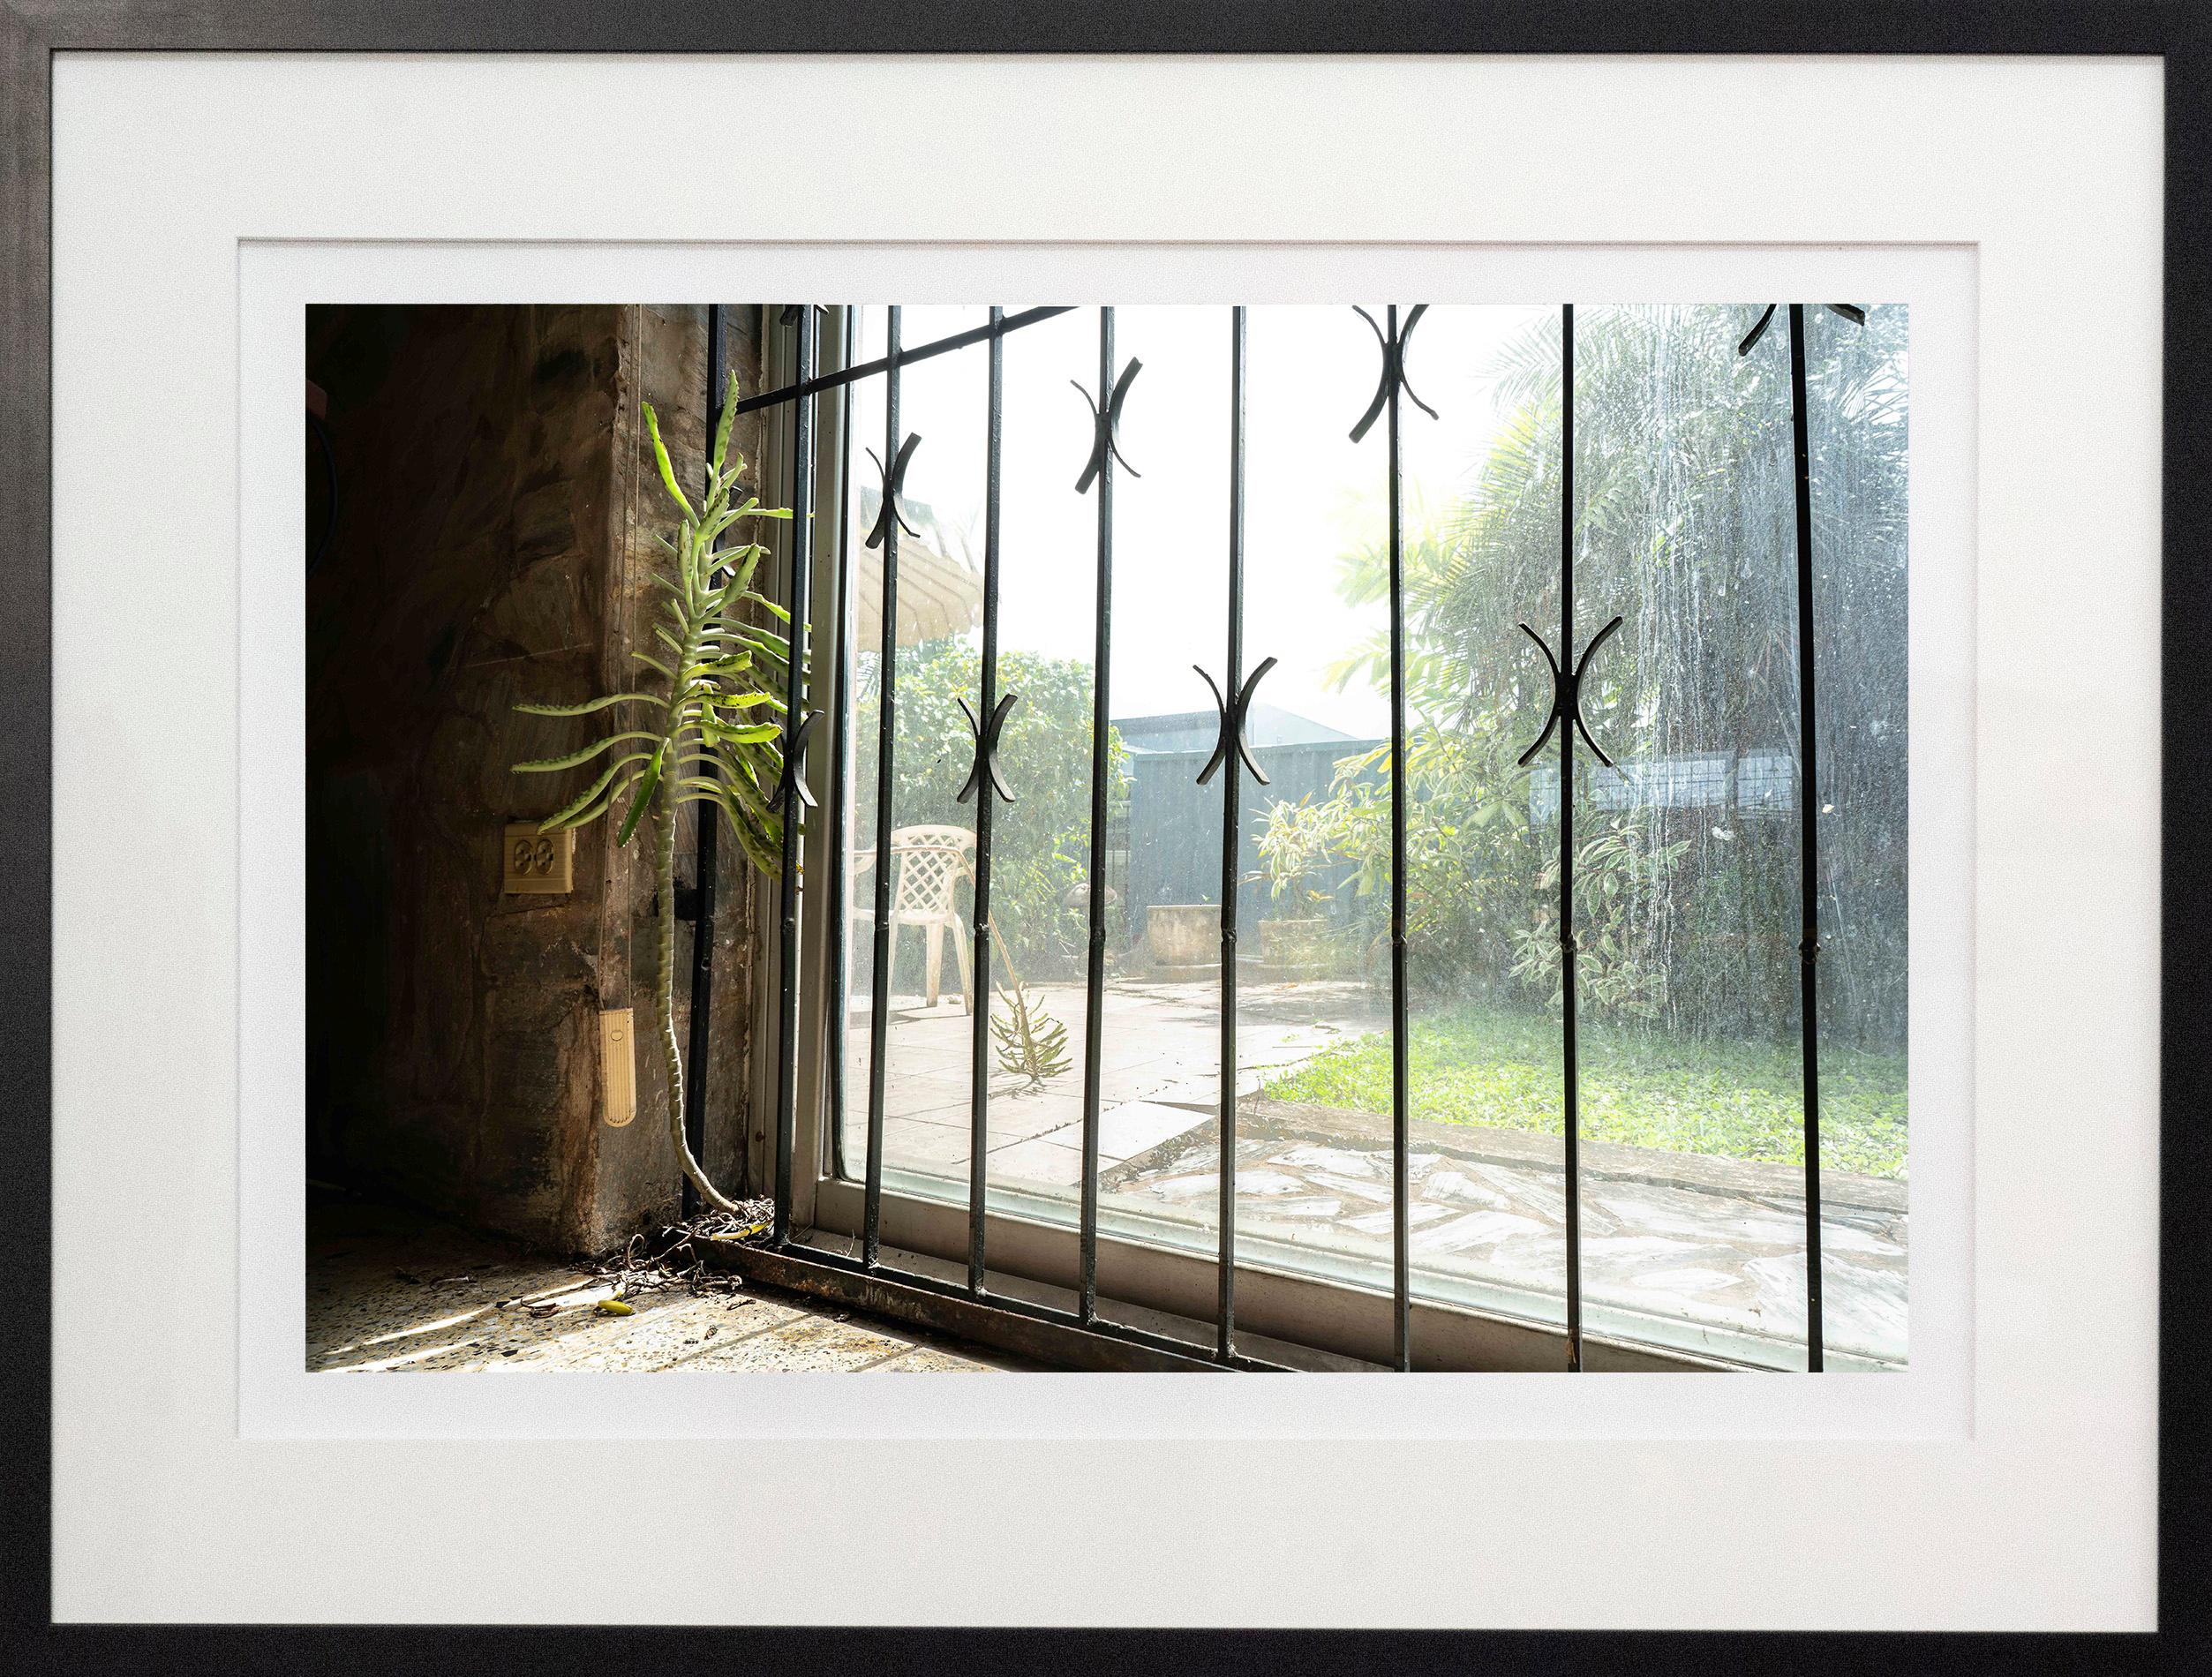 Shelter 1/8 - Trinidad, color, photography, giclée print - Photograph by Shani Mootoo